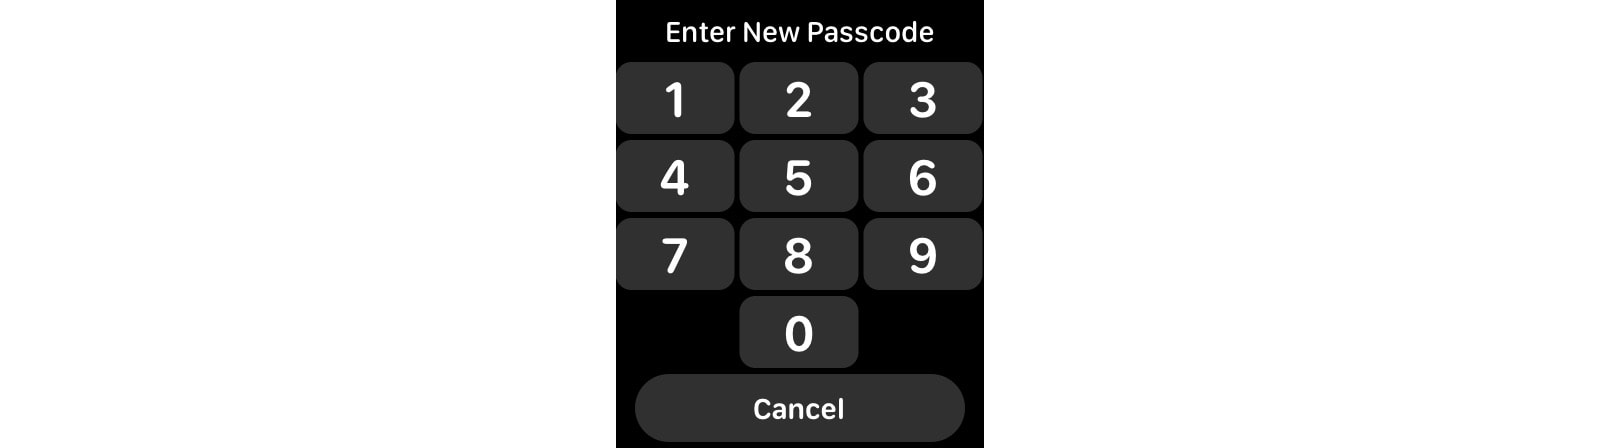 Your new Apple Watch passcode can contain up to 10 digits.